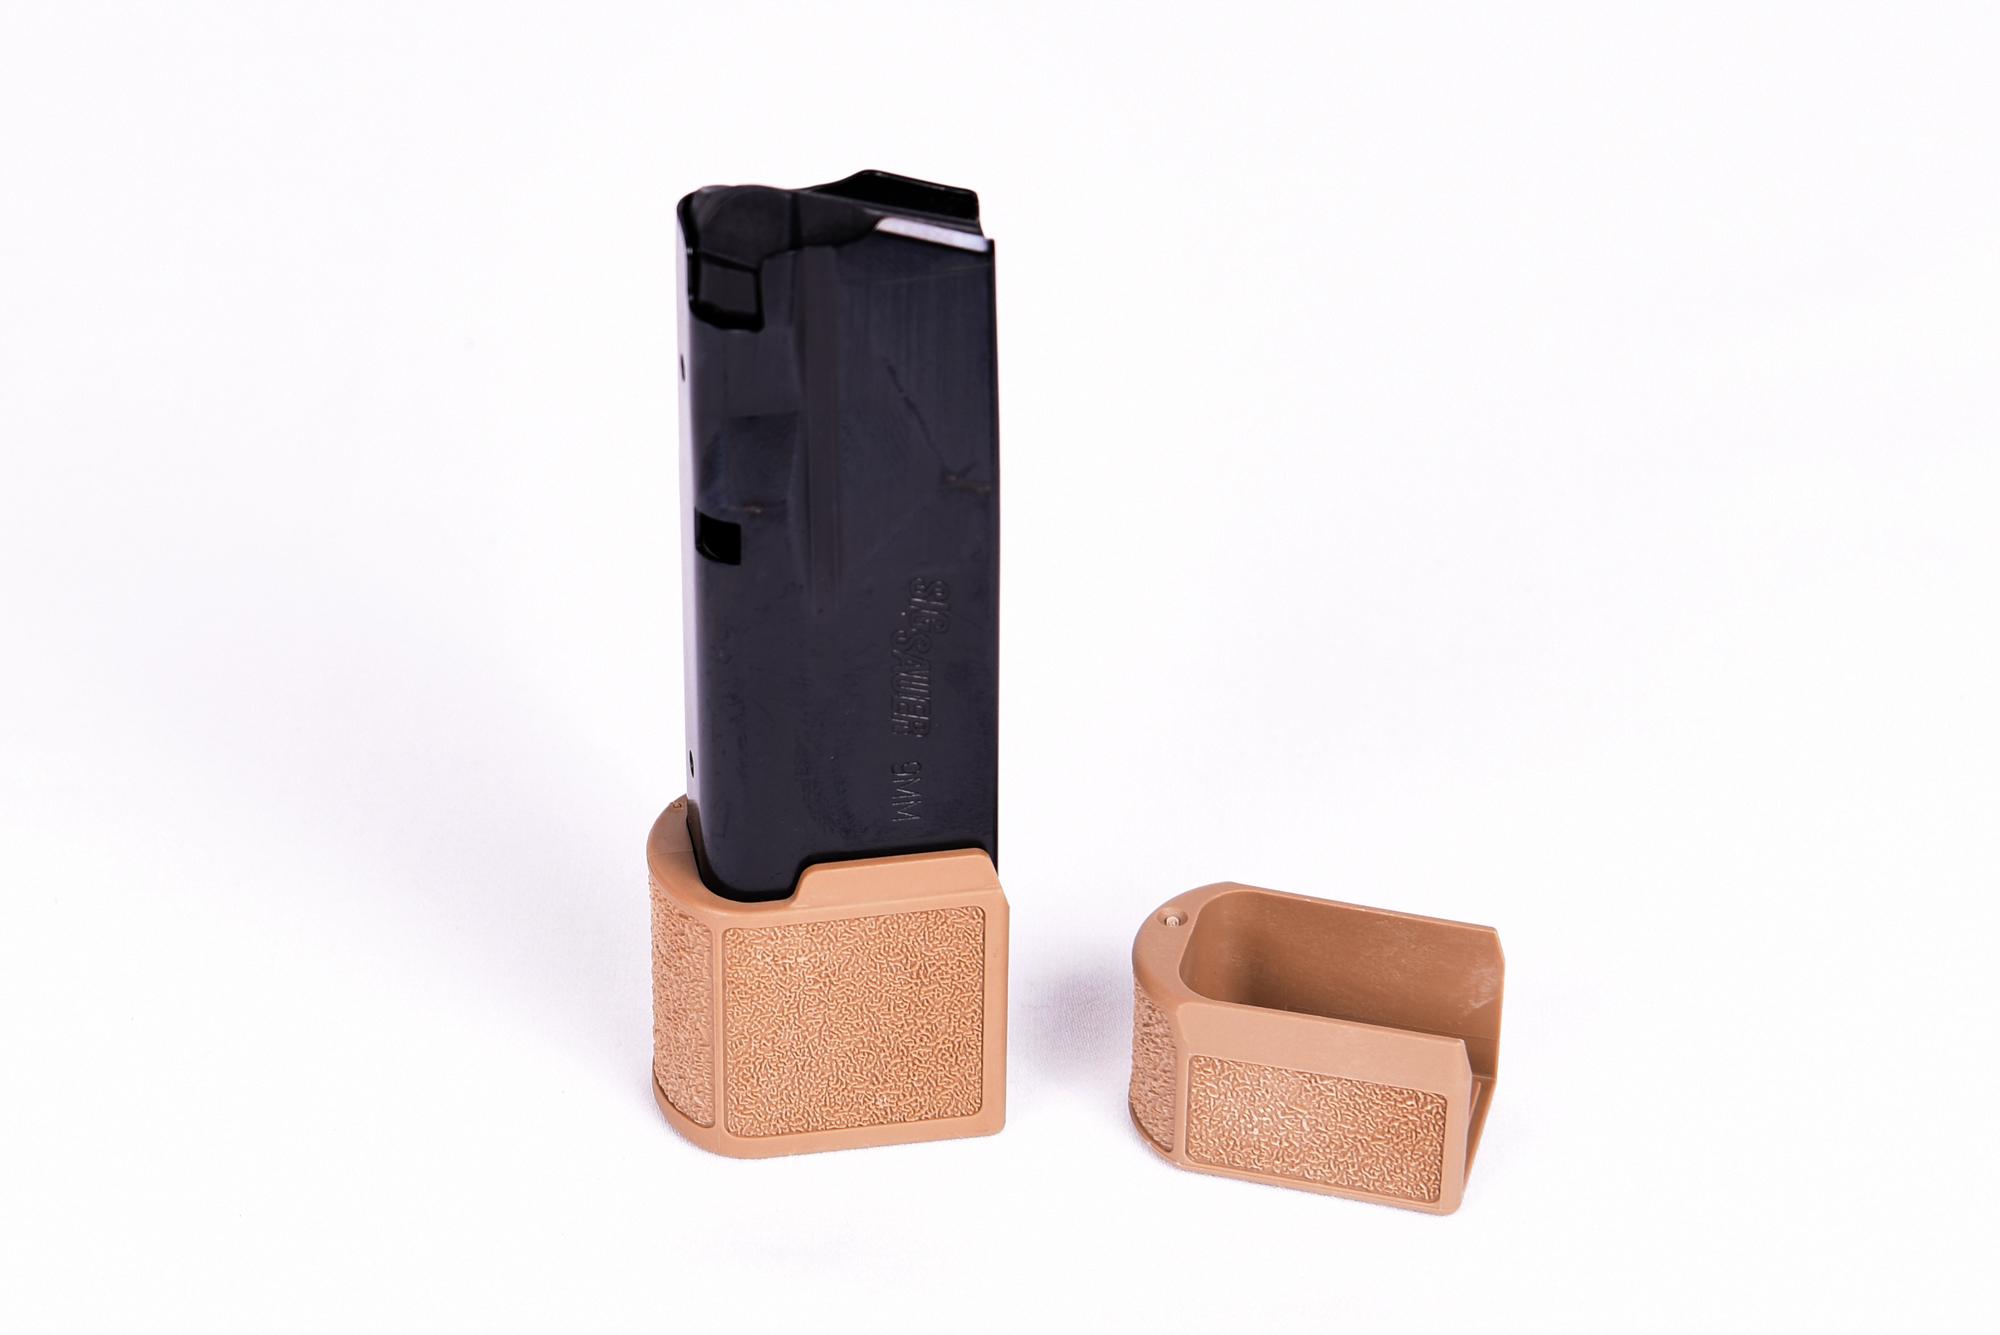 MAGAZINE P365 9MM 15RD COYOTE | MAG-365-9-15-COY